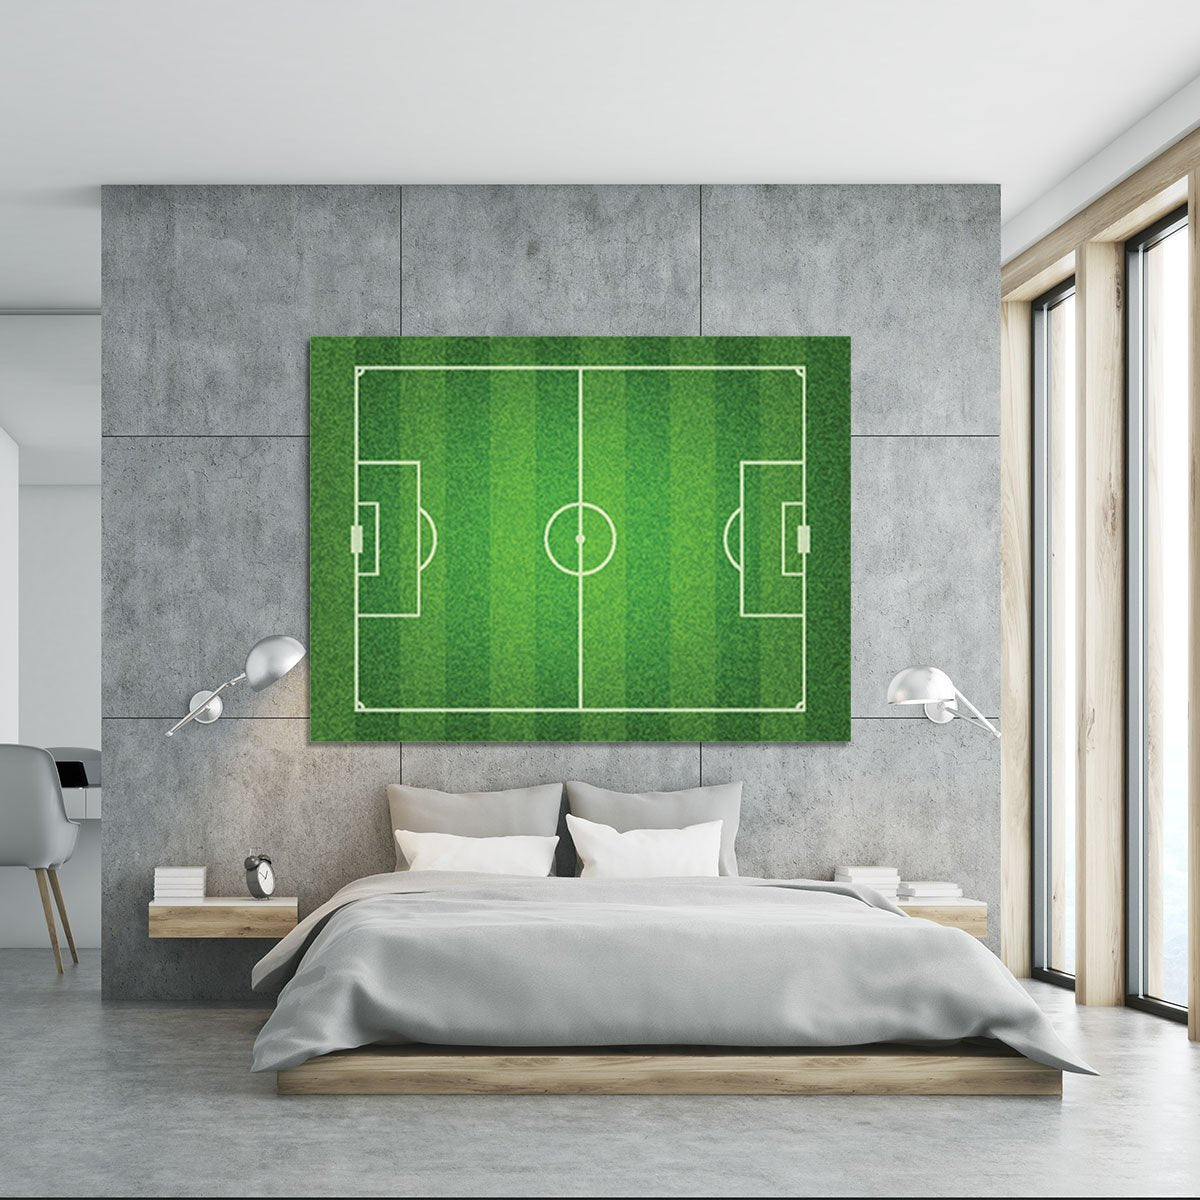 Green grass soccer field Canvas Print or Poster